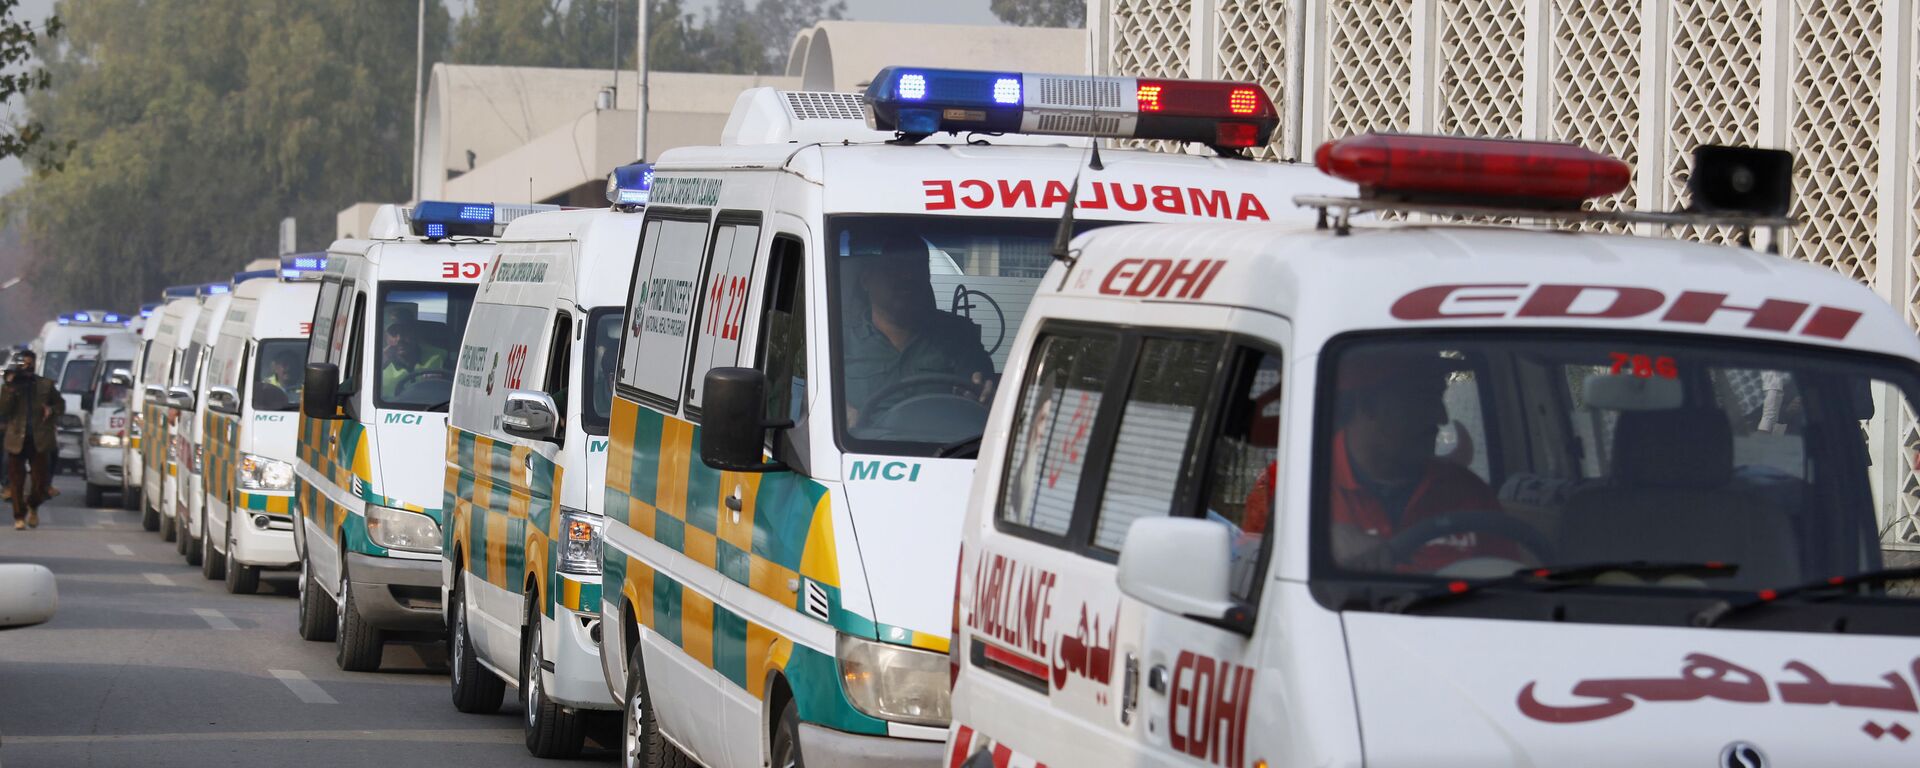 Ambulances queue to unload the bodies of plane crash victims at a local hospital in Islamabad, Pakistan, Thursday, Dec. 8, 2016. Pakistani military helicopters ferried remains of plane crash victims to the capital, Islamabad, as aviation authorities said they opened a probe into the crash that killed 47 passengers and crew the day before in the country's northwest. (AP Photo/Anjum Naveed) - 俄罗斯卫星通讯社, 1920, 20.08.2021